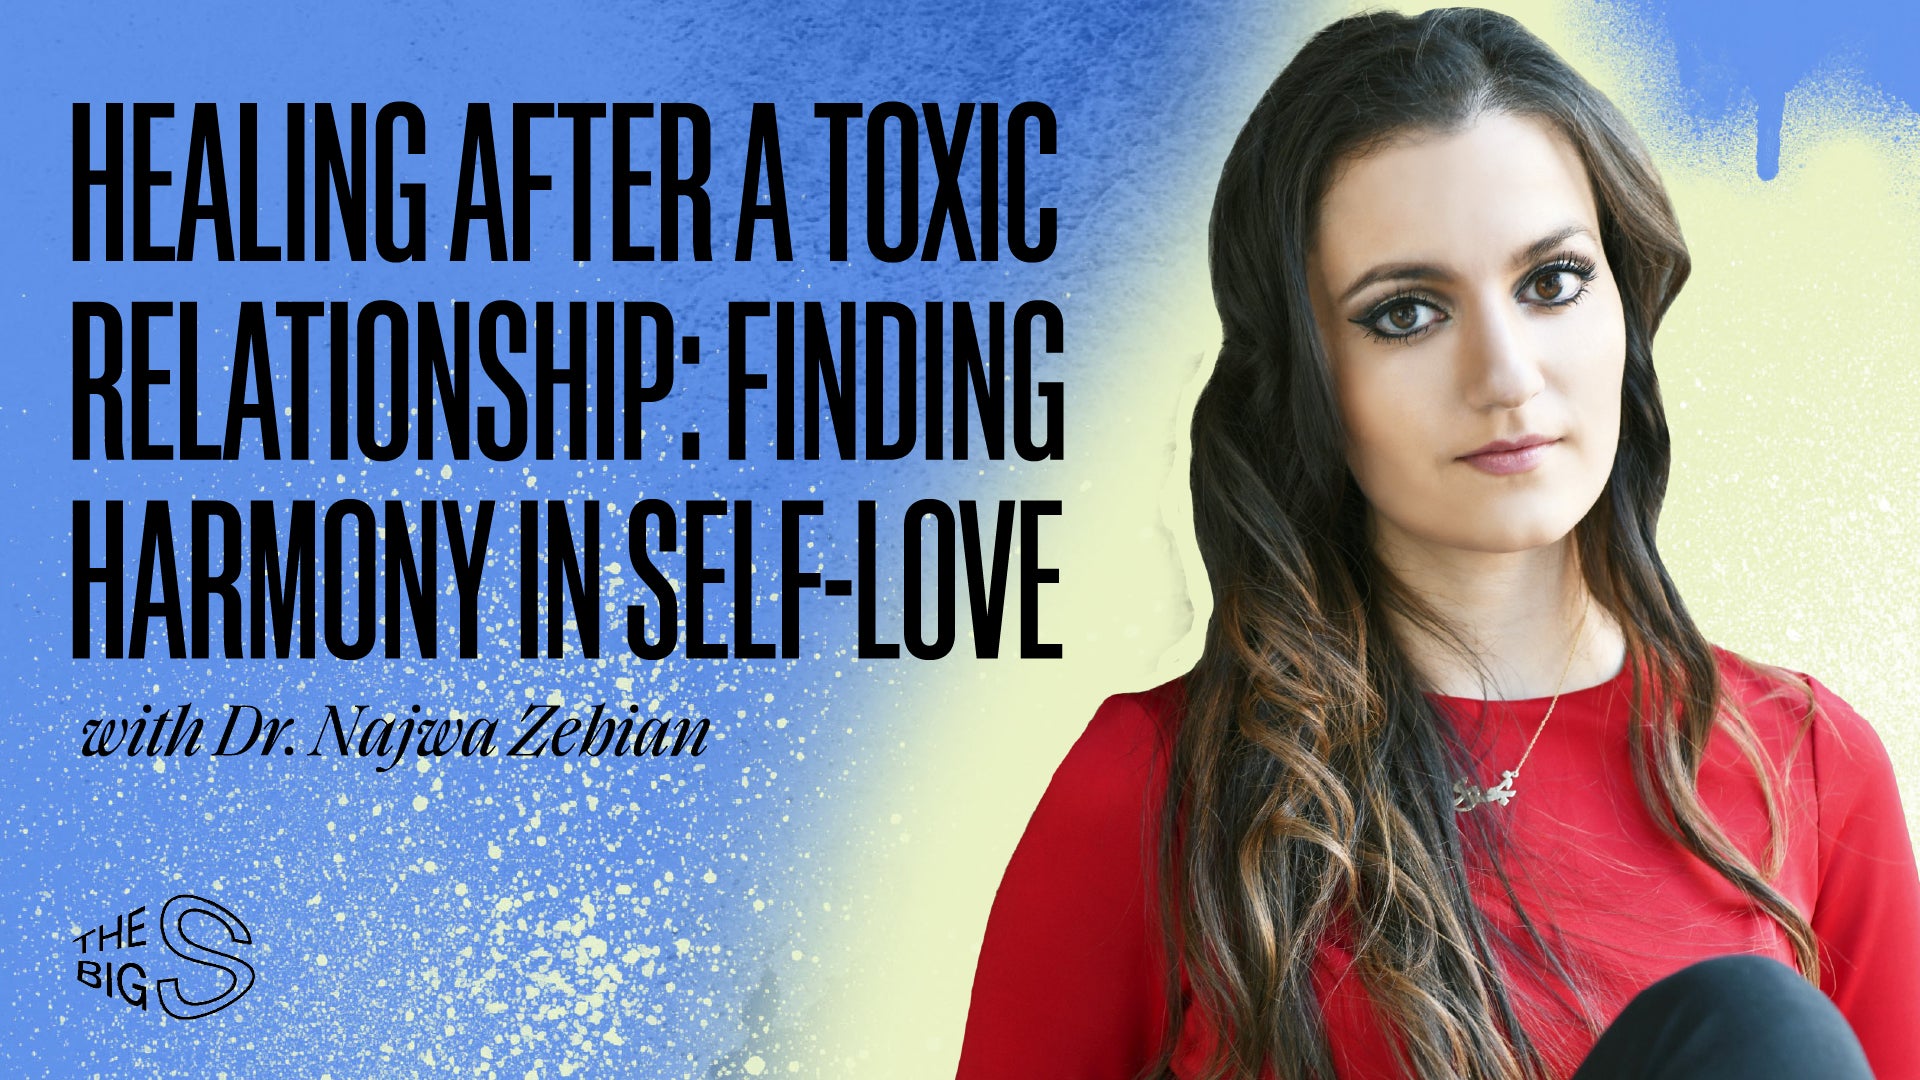 66. Healing After A Toxic Relationship: Finding Harmony in Self-Love with Dr. Najwa Zebian